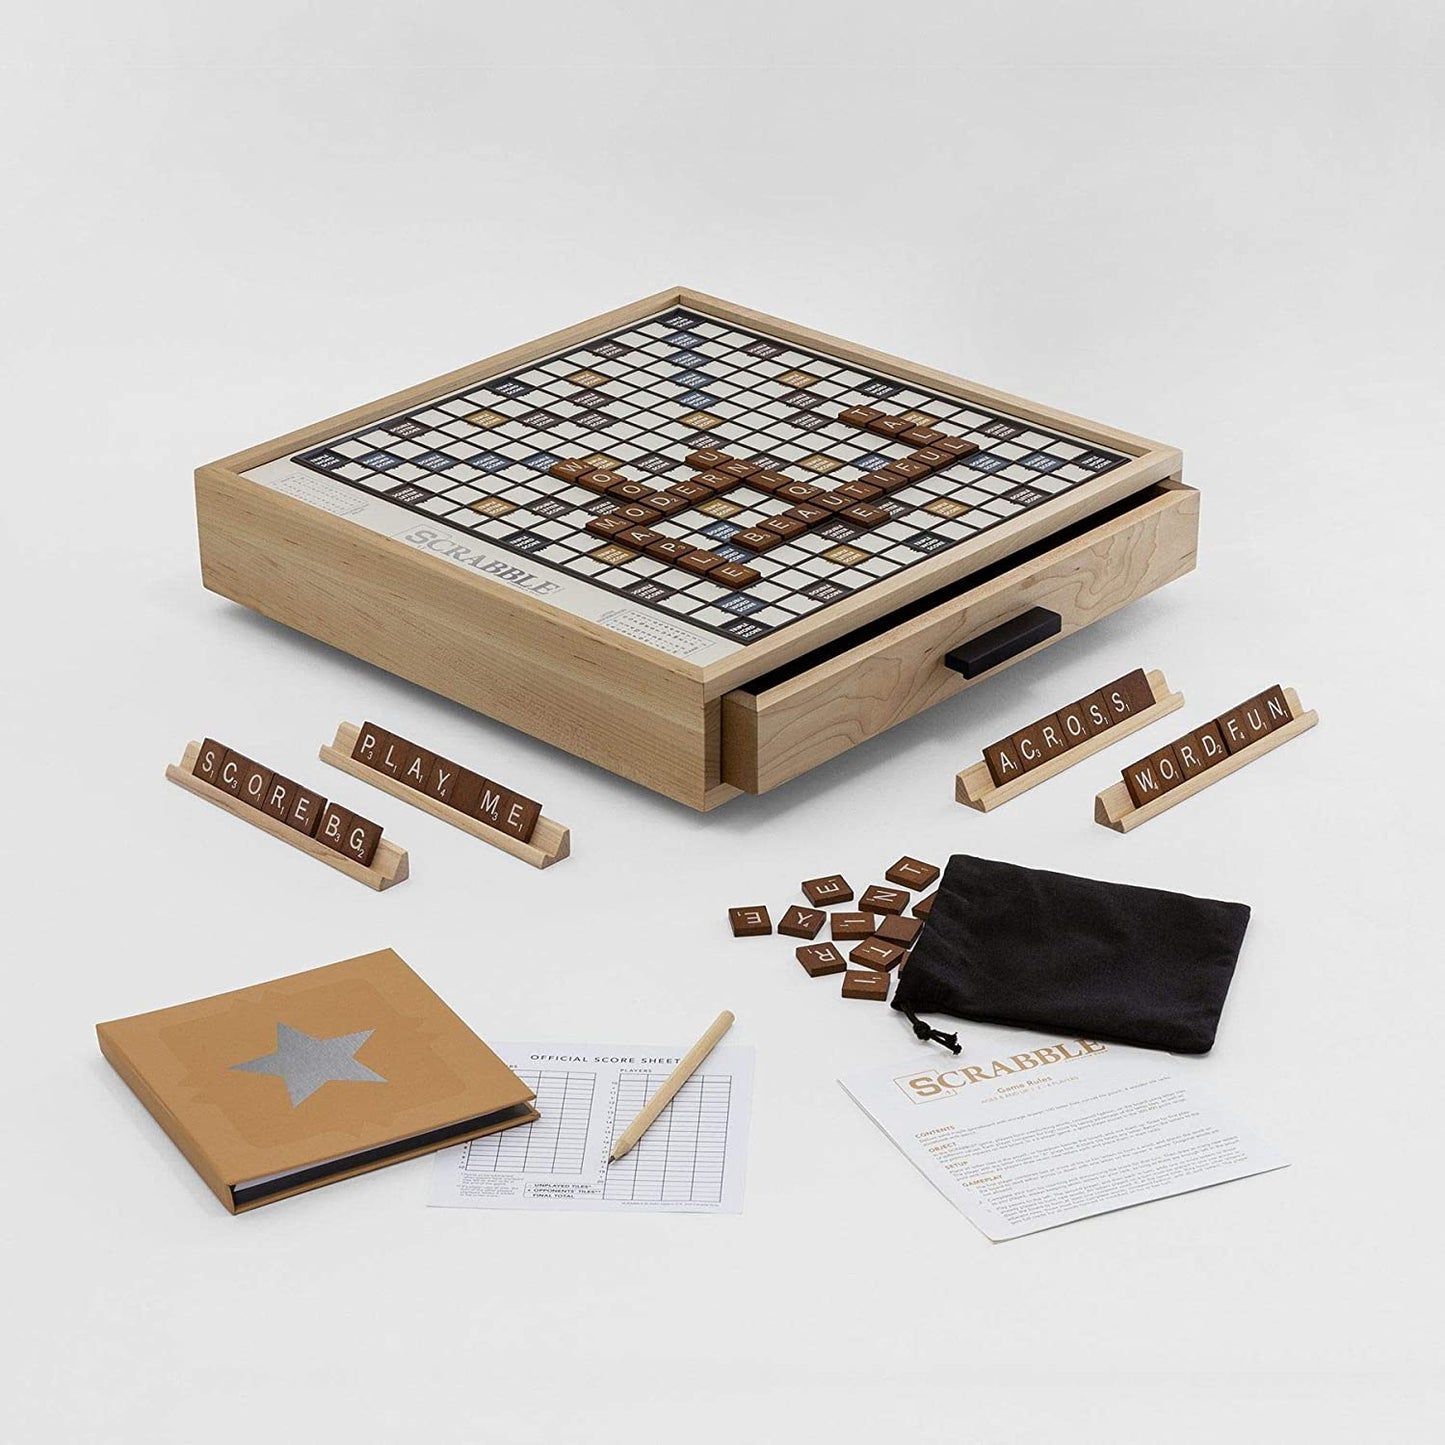 A luxury edition of the classic Scrabble game which is in a maple wood rotating cabinet. Tile pieces are laid out on the game board.